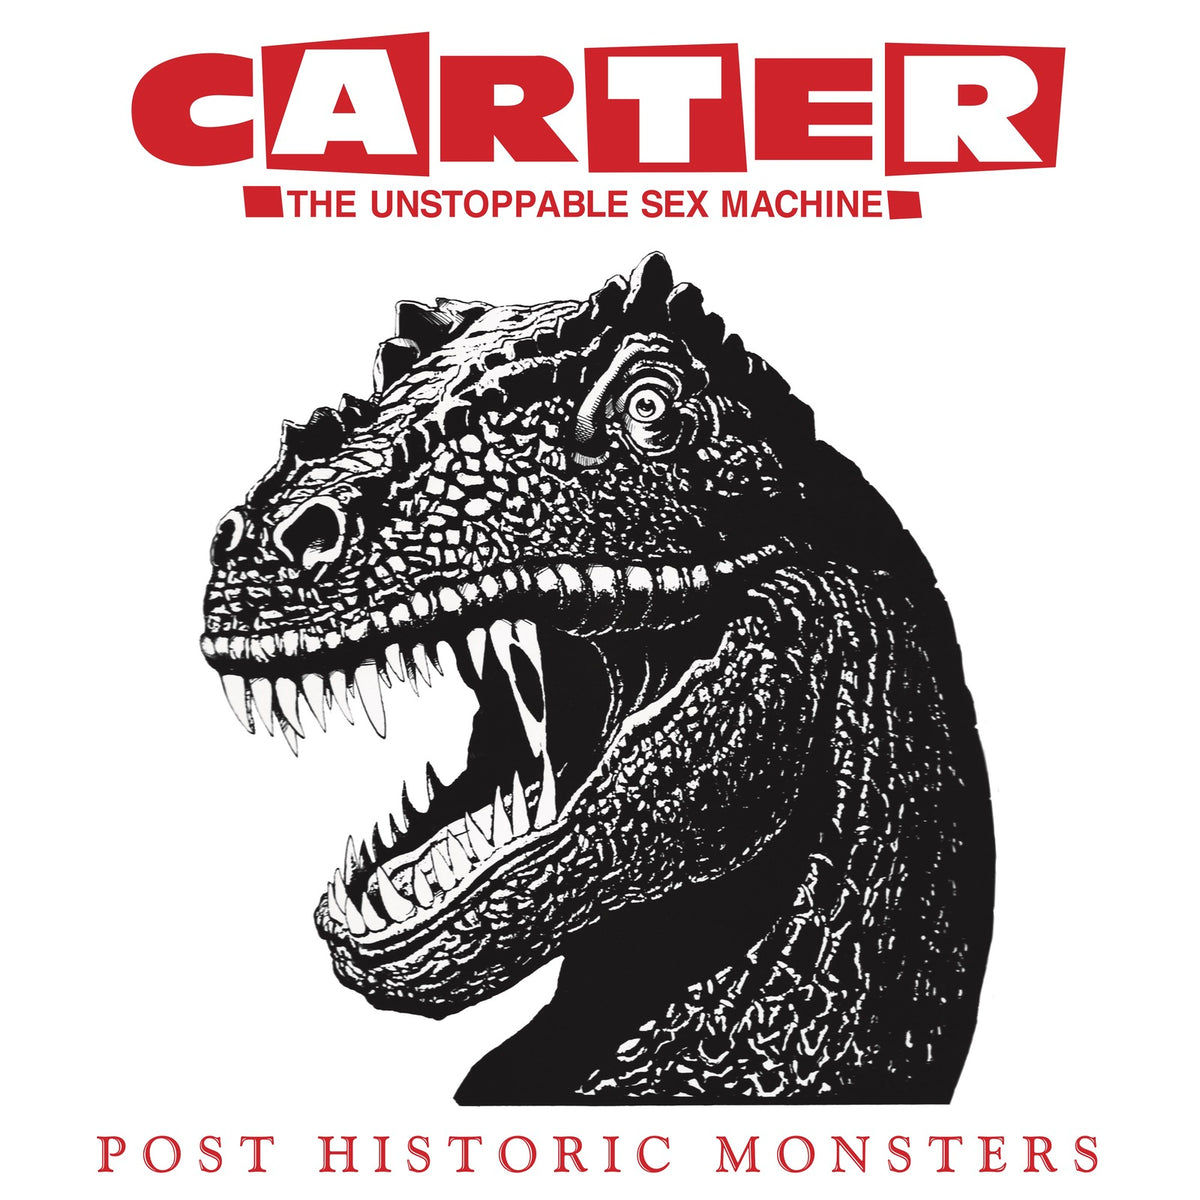 Carter the Unstoppable Sex Machine - Post Historic Monsters (2LP Expanded Edition) - CRV1661